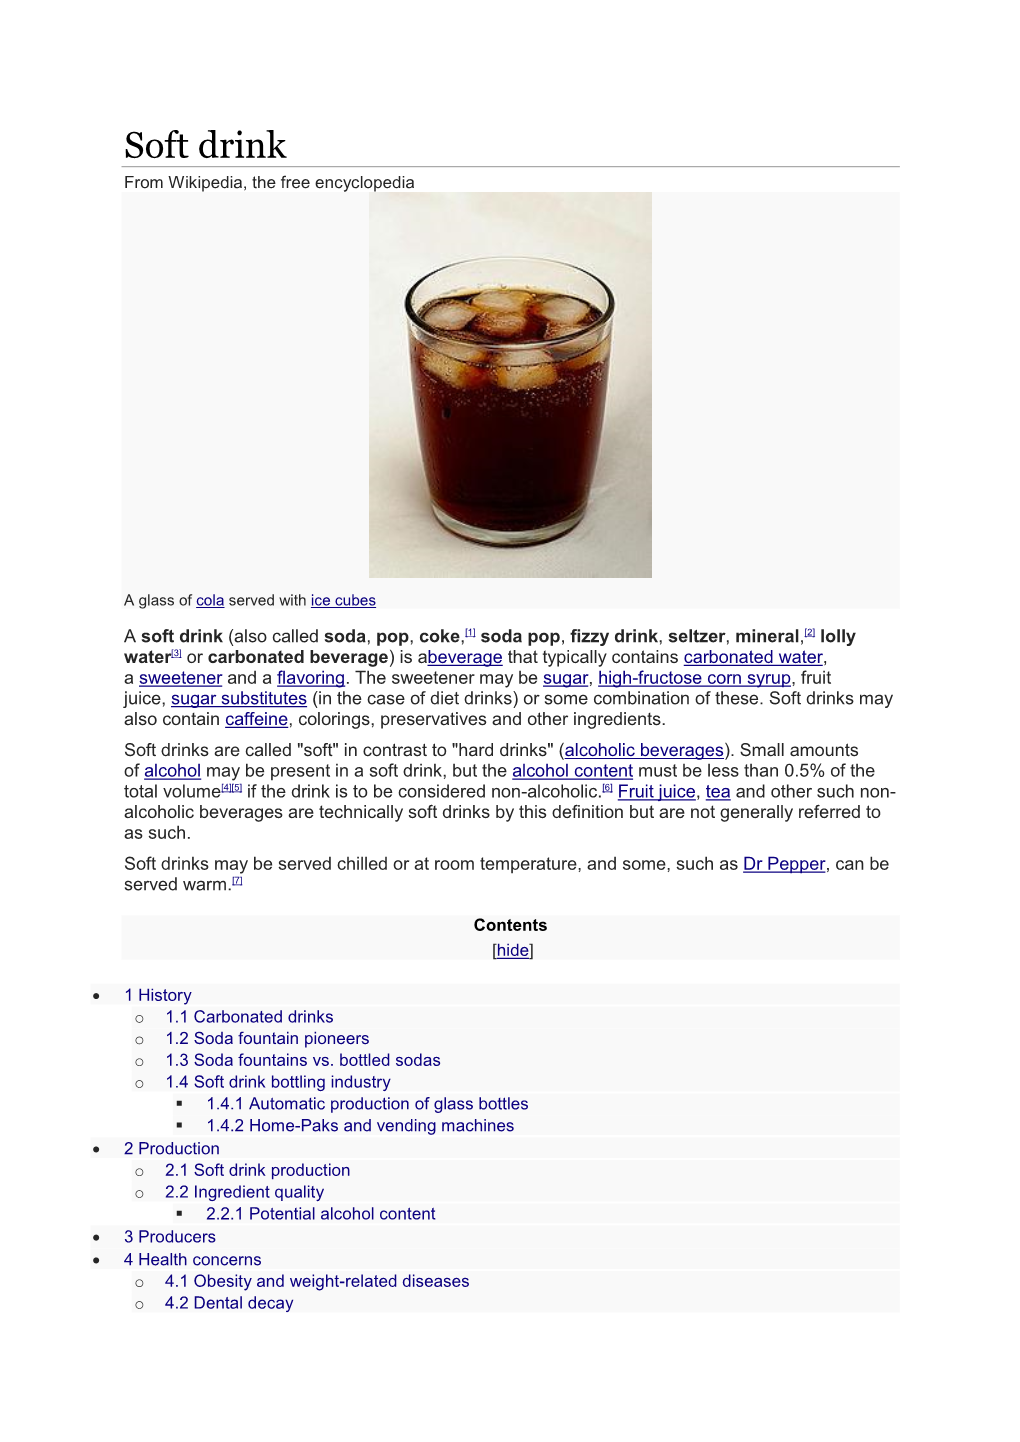 Soft Drink from Wikipedia, the Free Encyclopedia